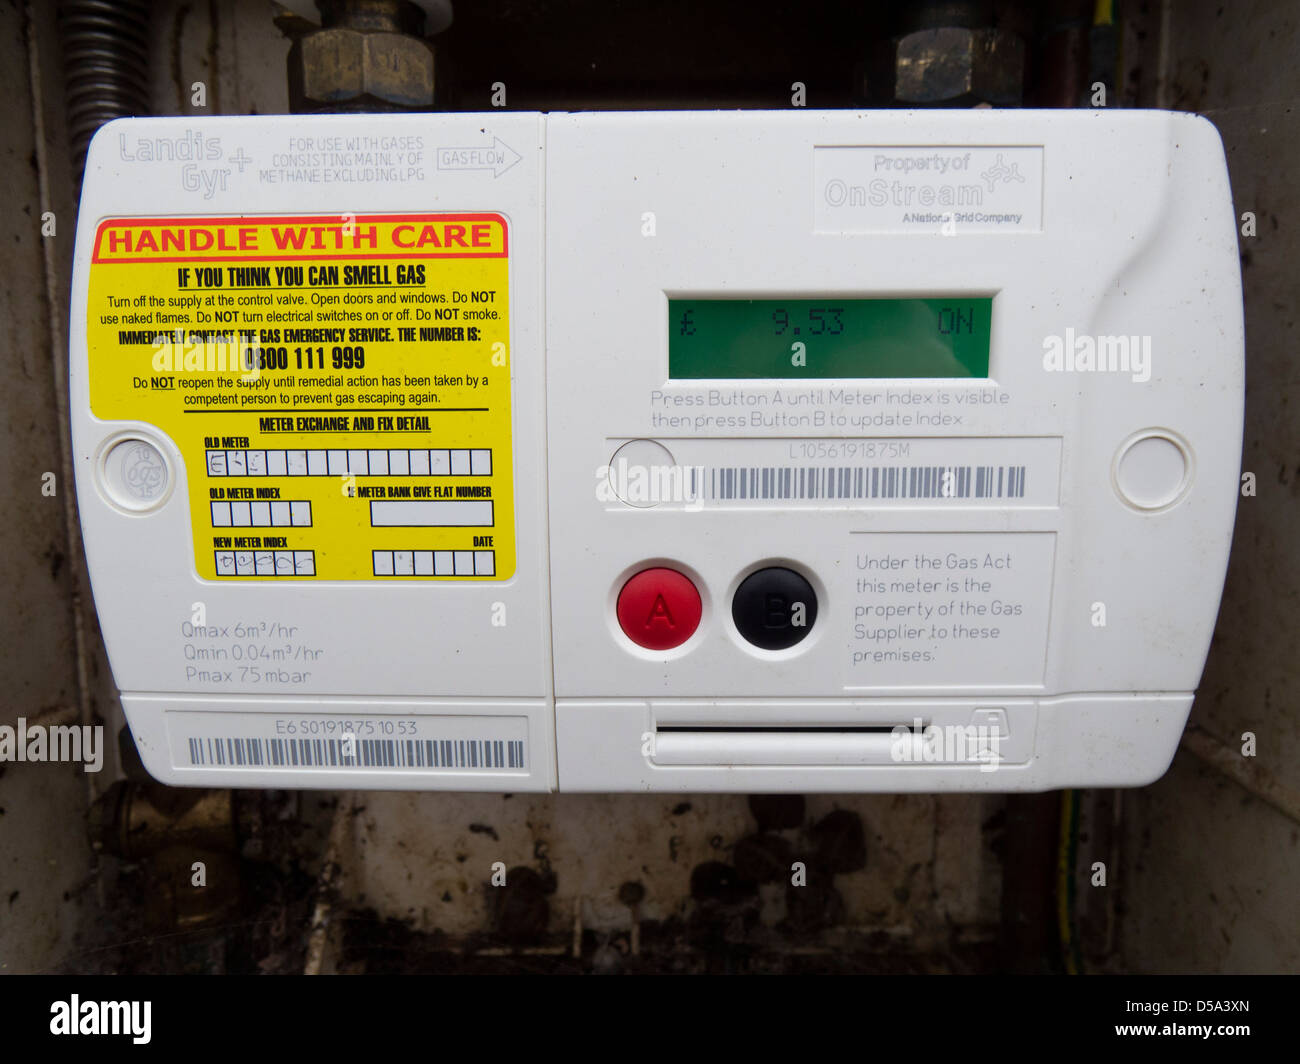 Prepaid Gas meter for UK house. Stock Photo